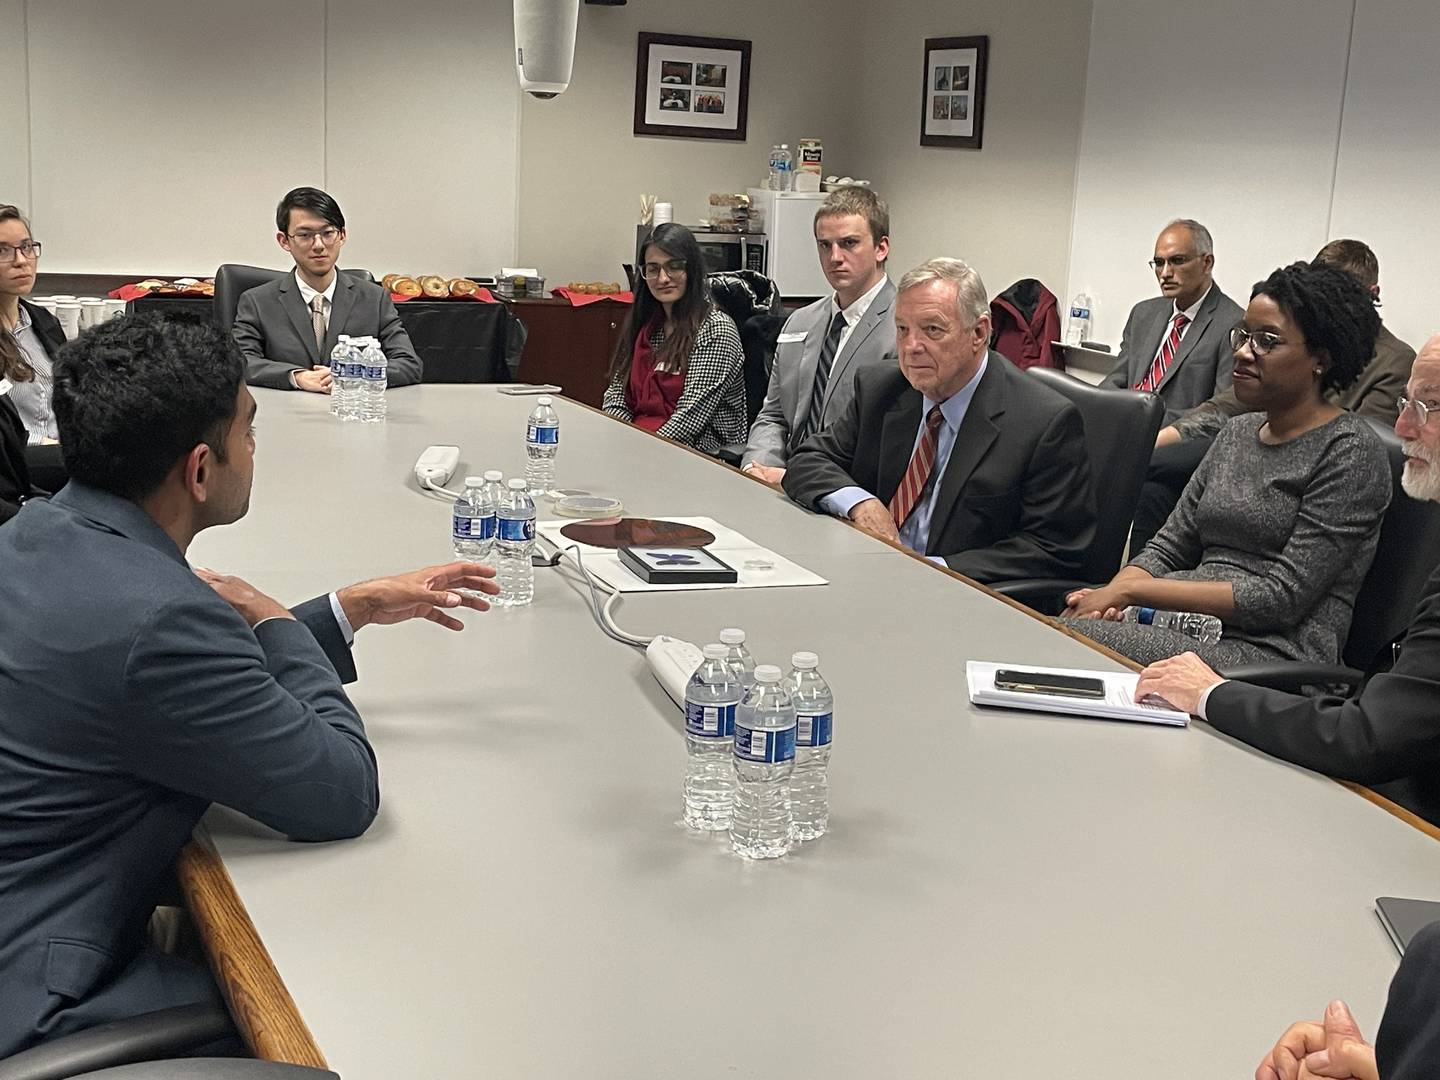 U.S. Sen. Dick Durbin and U.S. Rep. Lauren Underwood hold discussion with students and professors of NIU's College of Engineering and Engineering Technology, shown here April 5, 2023.